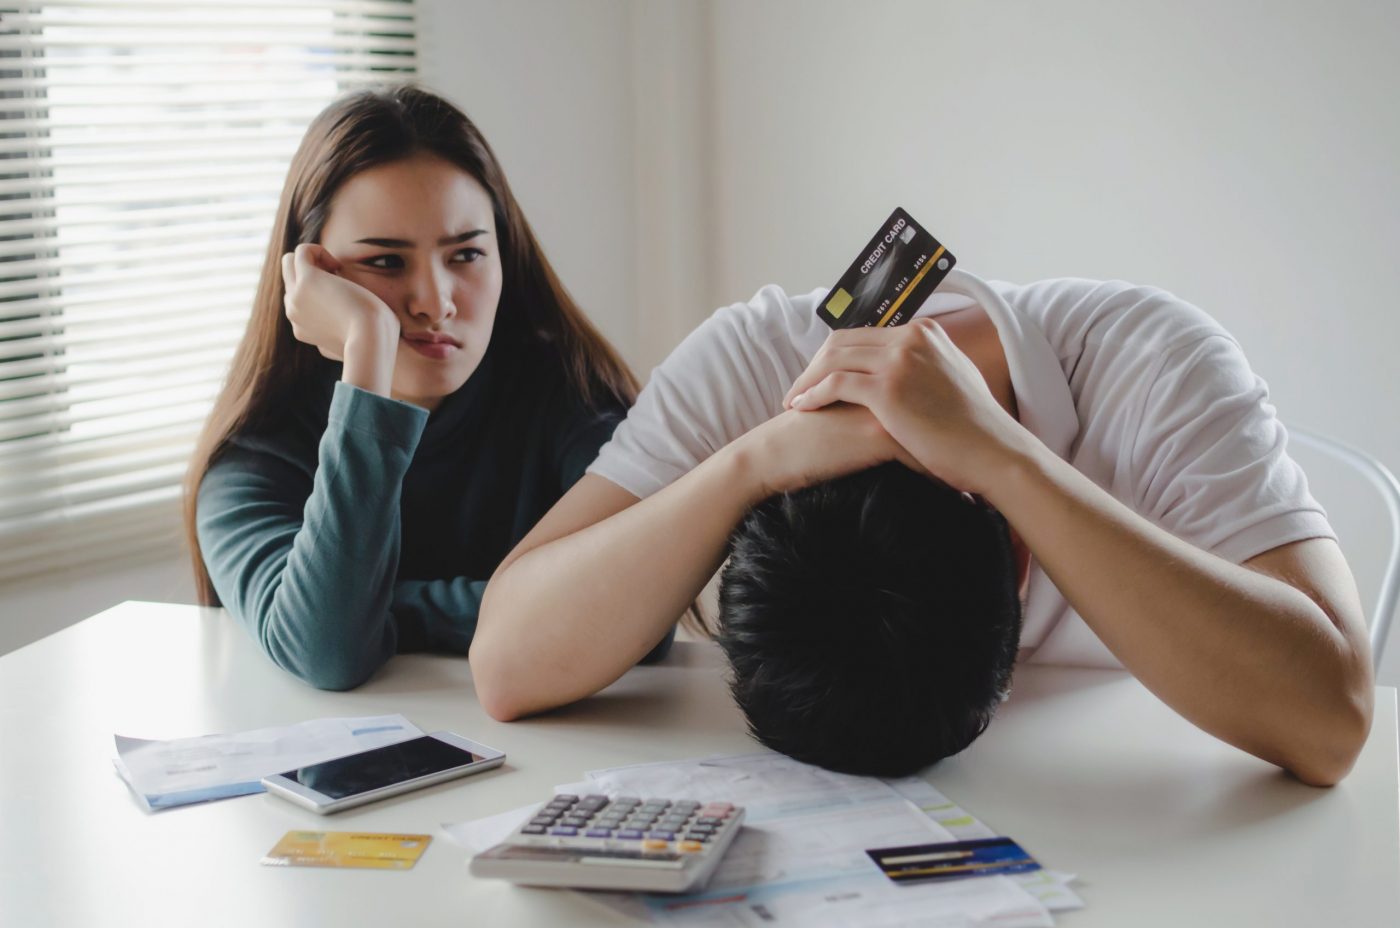 What Causes Financial Stress?